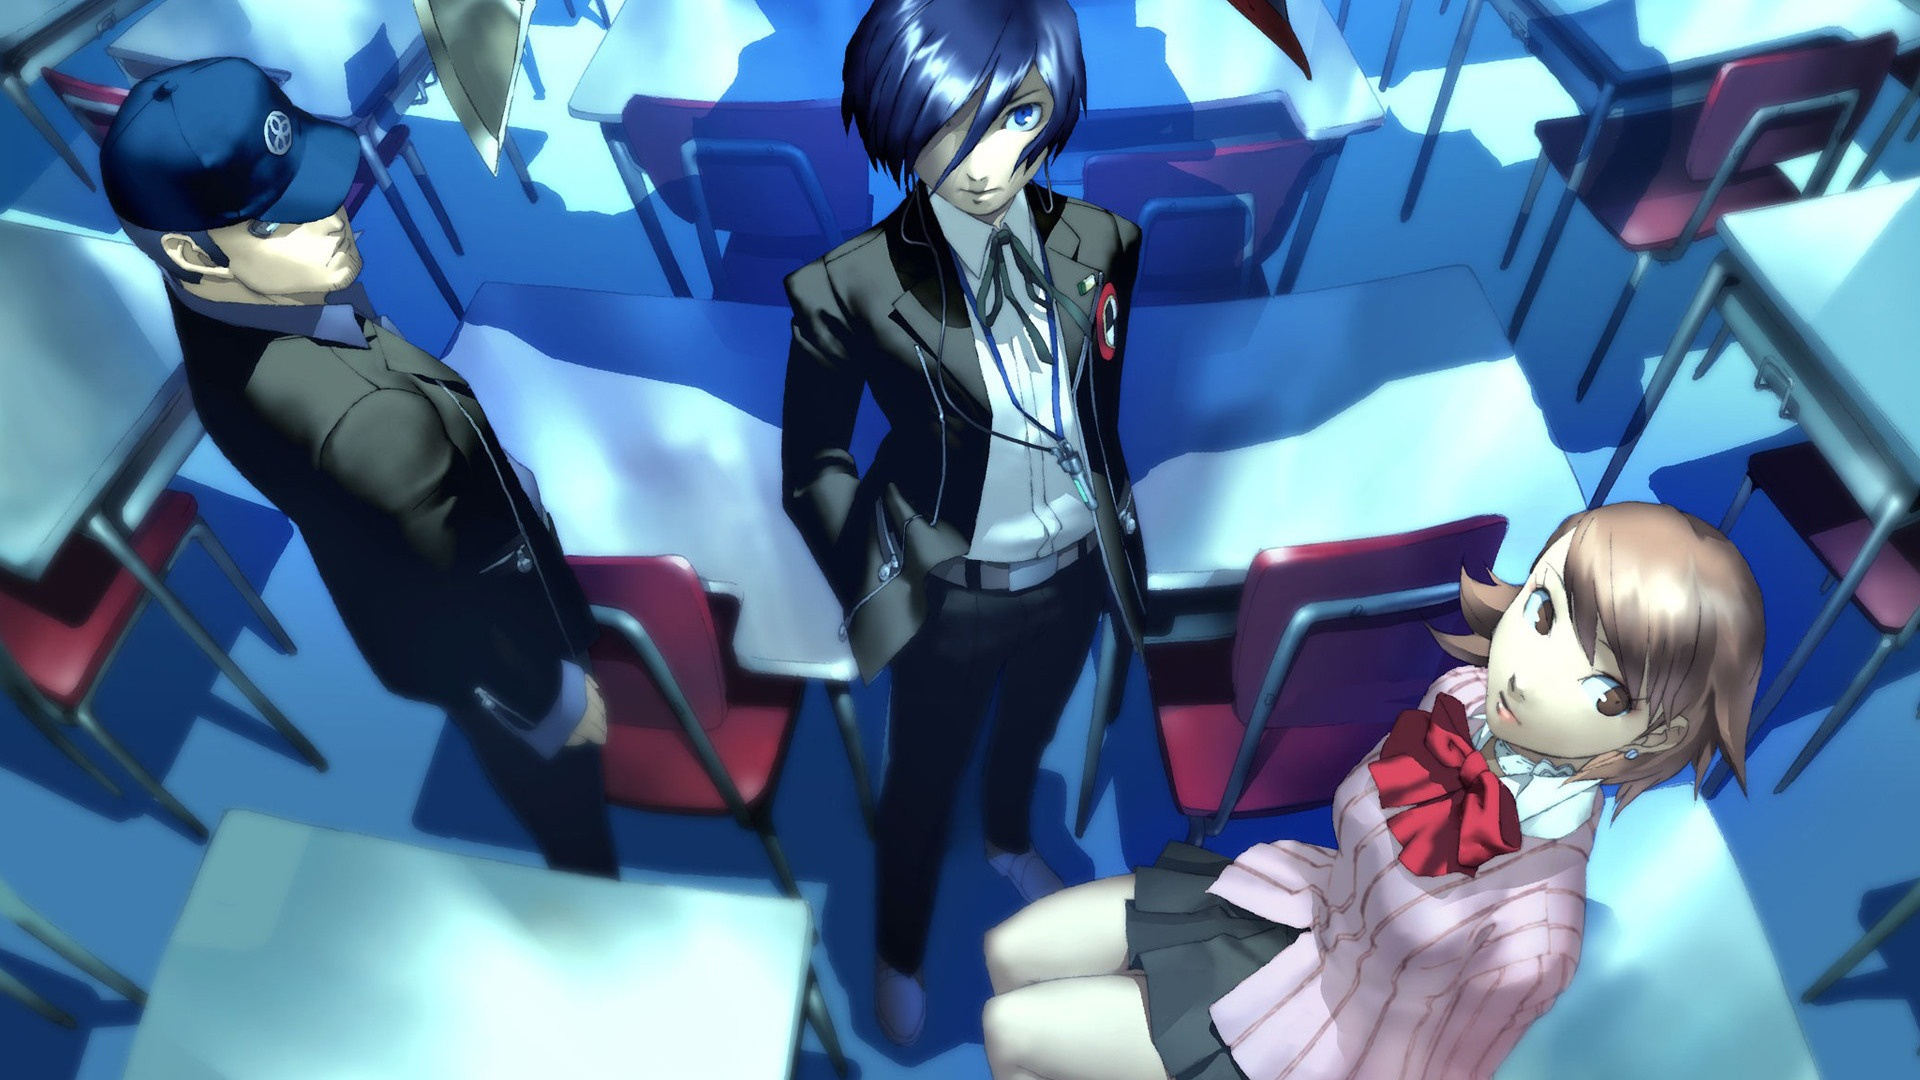 atlus-will-actively-discuss-bringing-persona-3-and-persona-4-to-ps4-if-there-s-an-opportunity